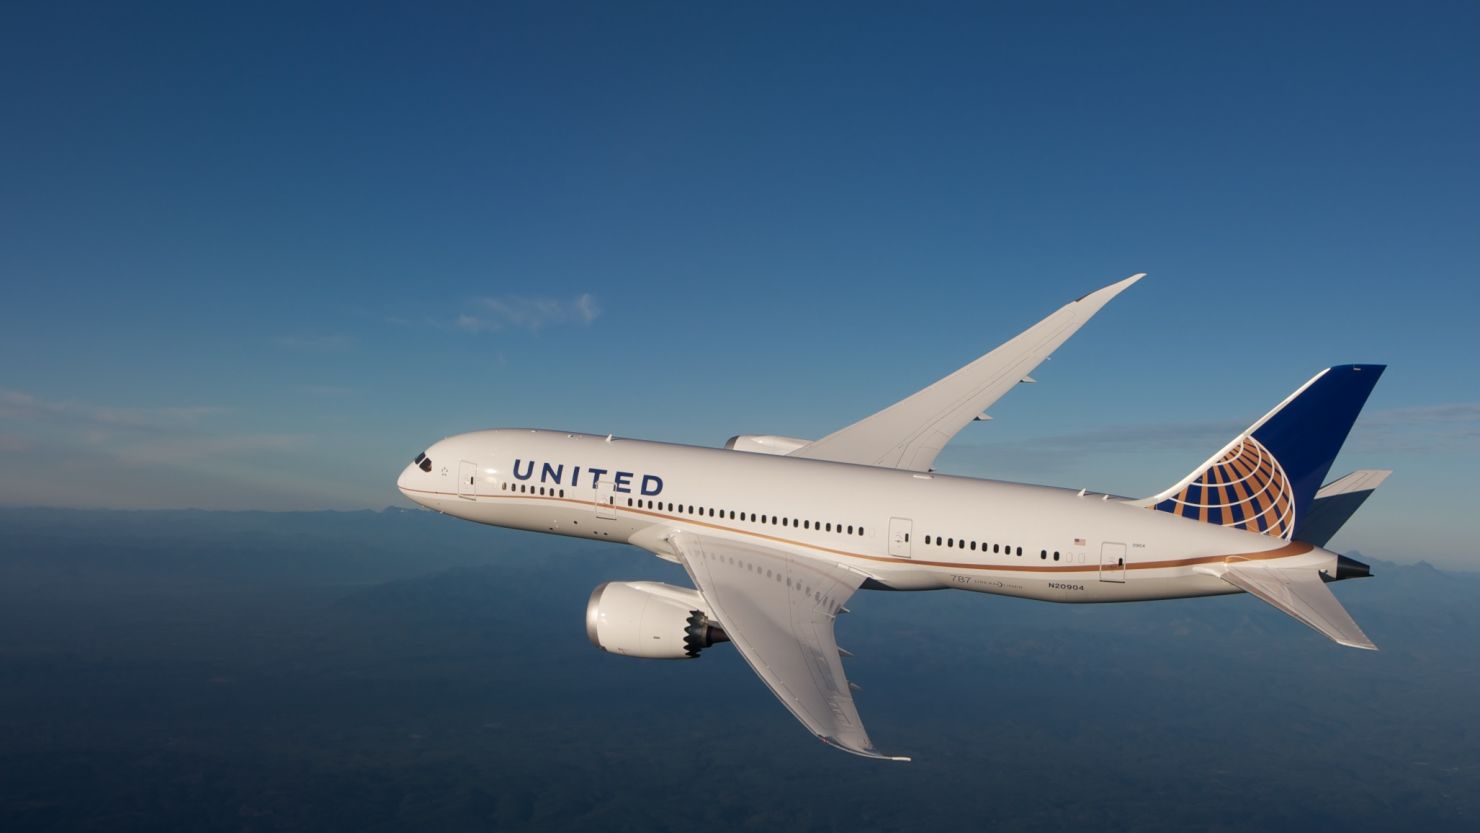 United is starting its first international service using the 787 Dreamliner on Thursday.